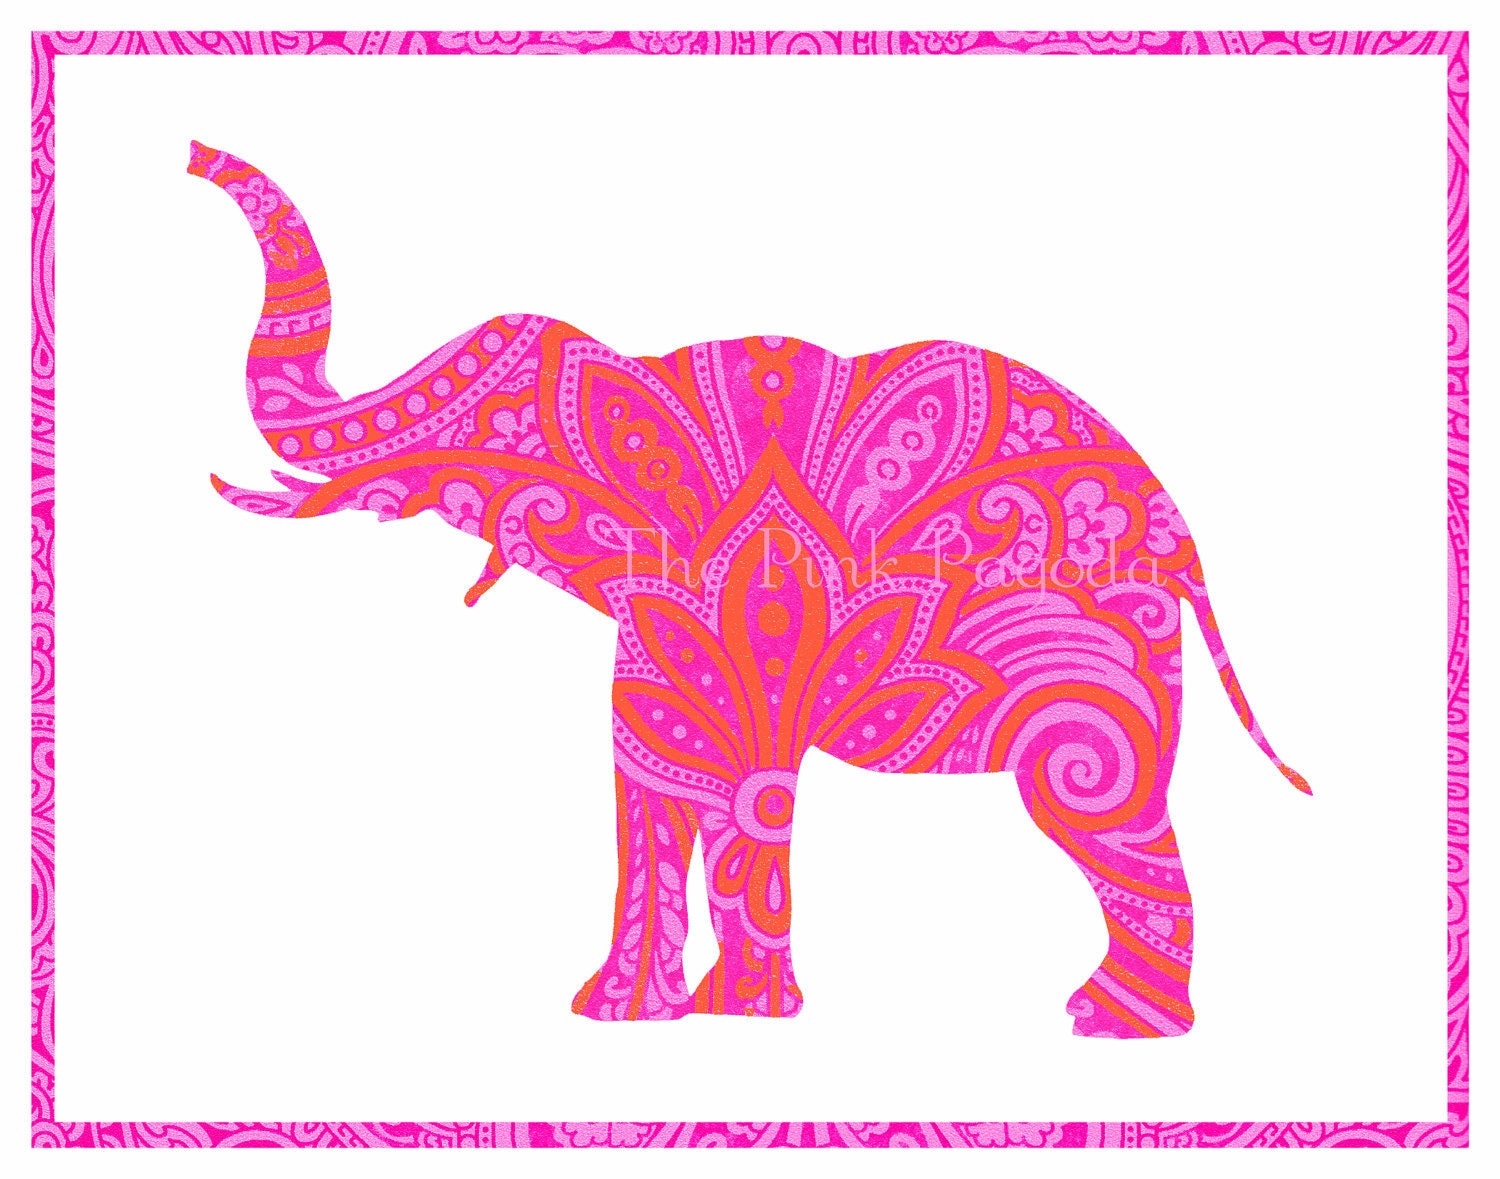 Tangerine Orange and Hot Pink Indian Paisley Elephant Silhouette Giclee 11x14